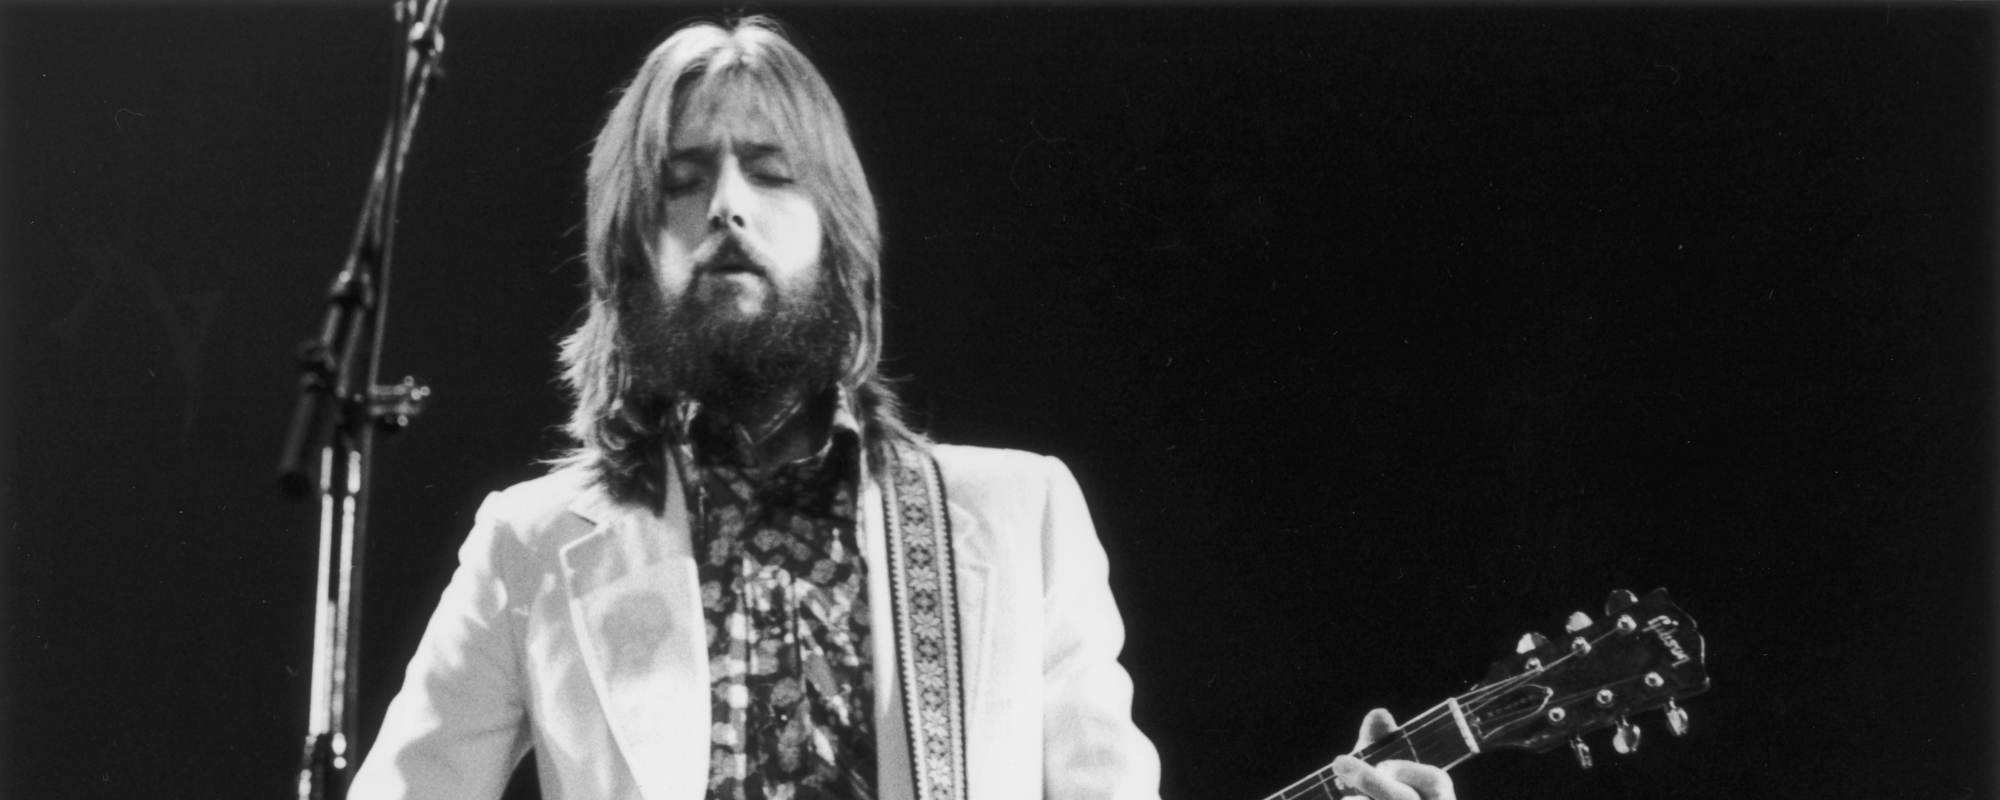 10 Iconic Moments From Eric Clapton’s Career